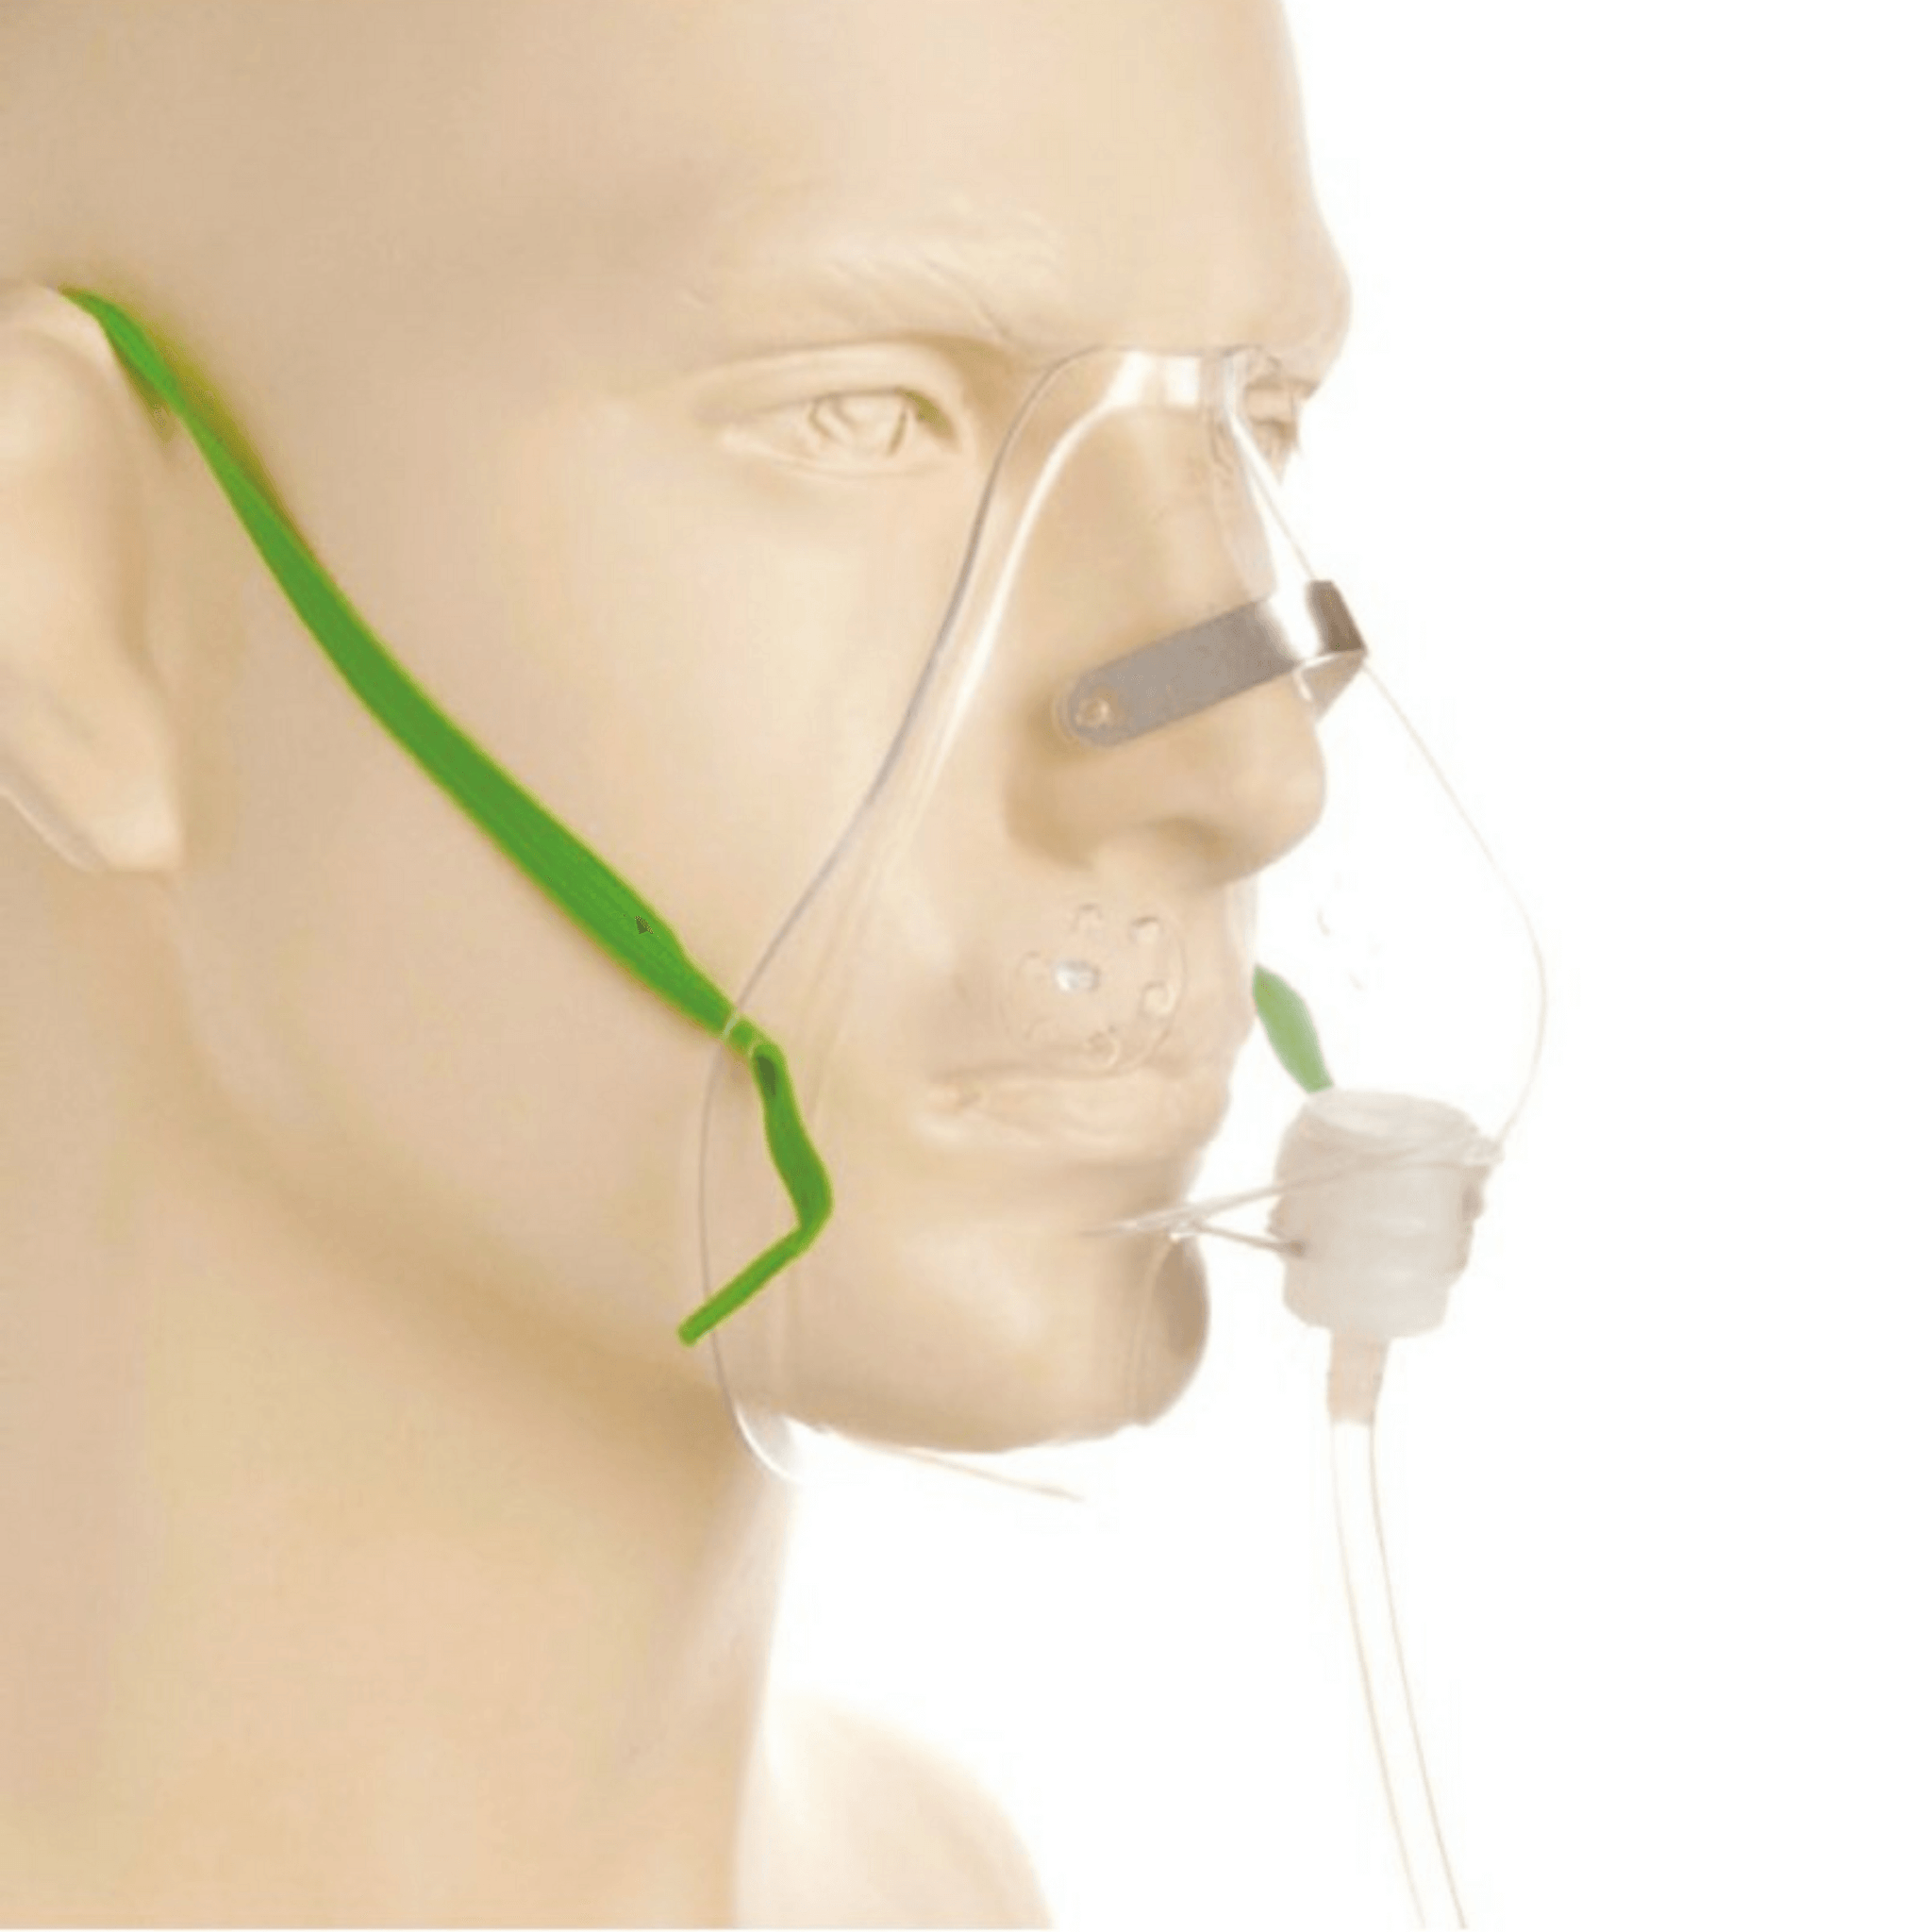 Oxygen Mask with Tube- Adult